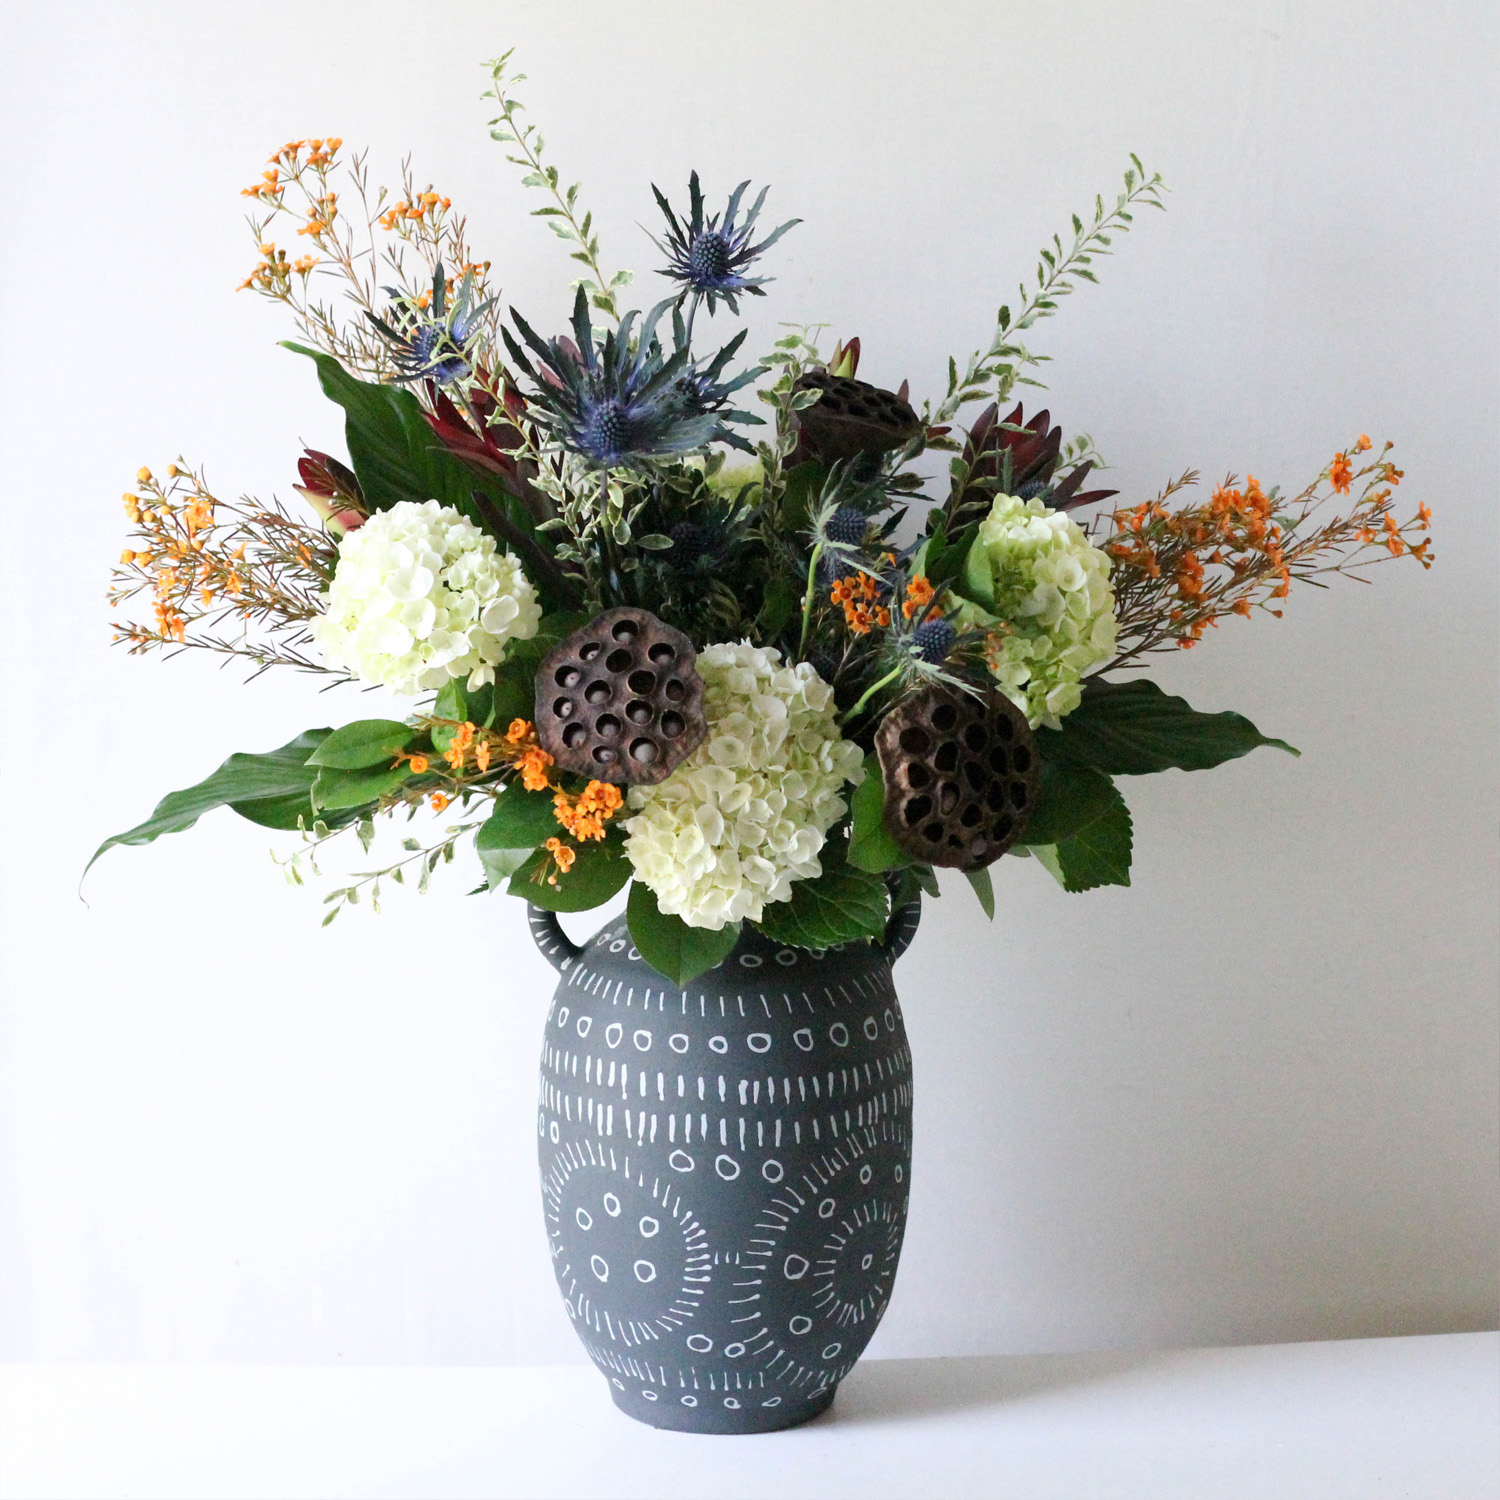 Valyrian - A visually captivating floral arrangement by combining contrasting textures of dried lotus pods with the softness of the mini green hydrangea